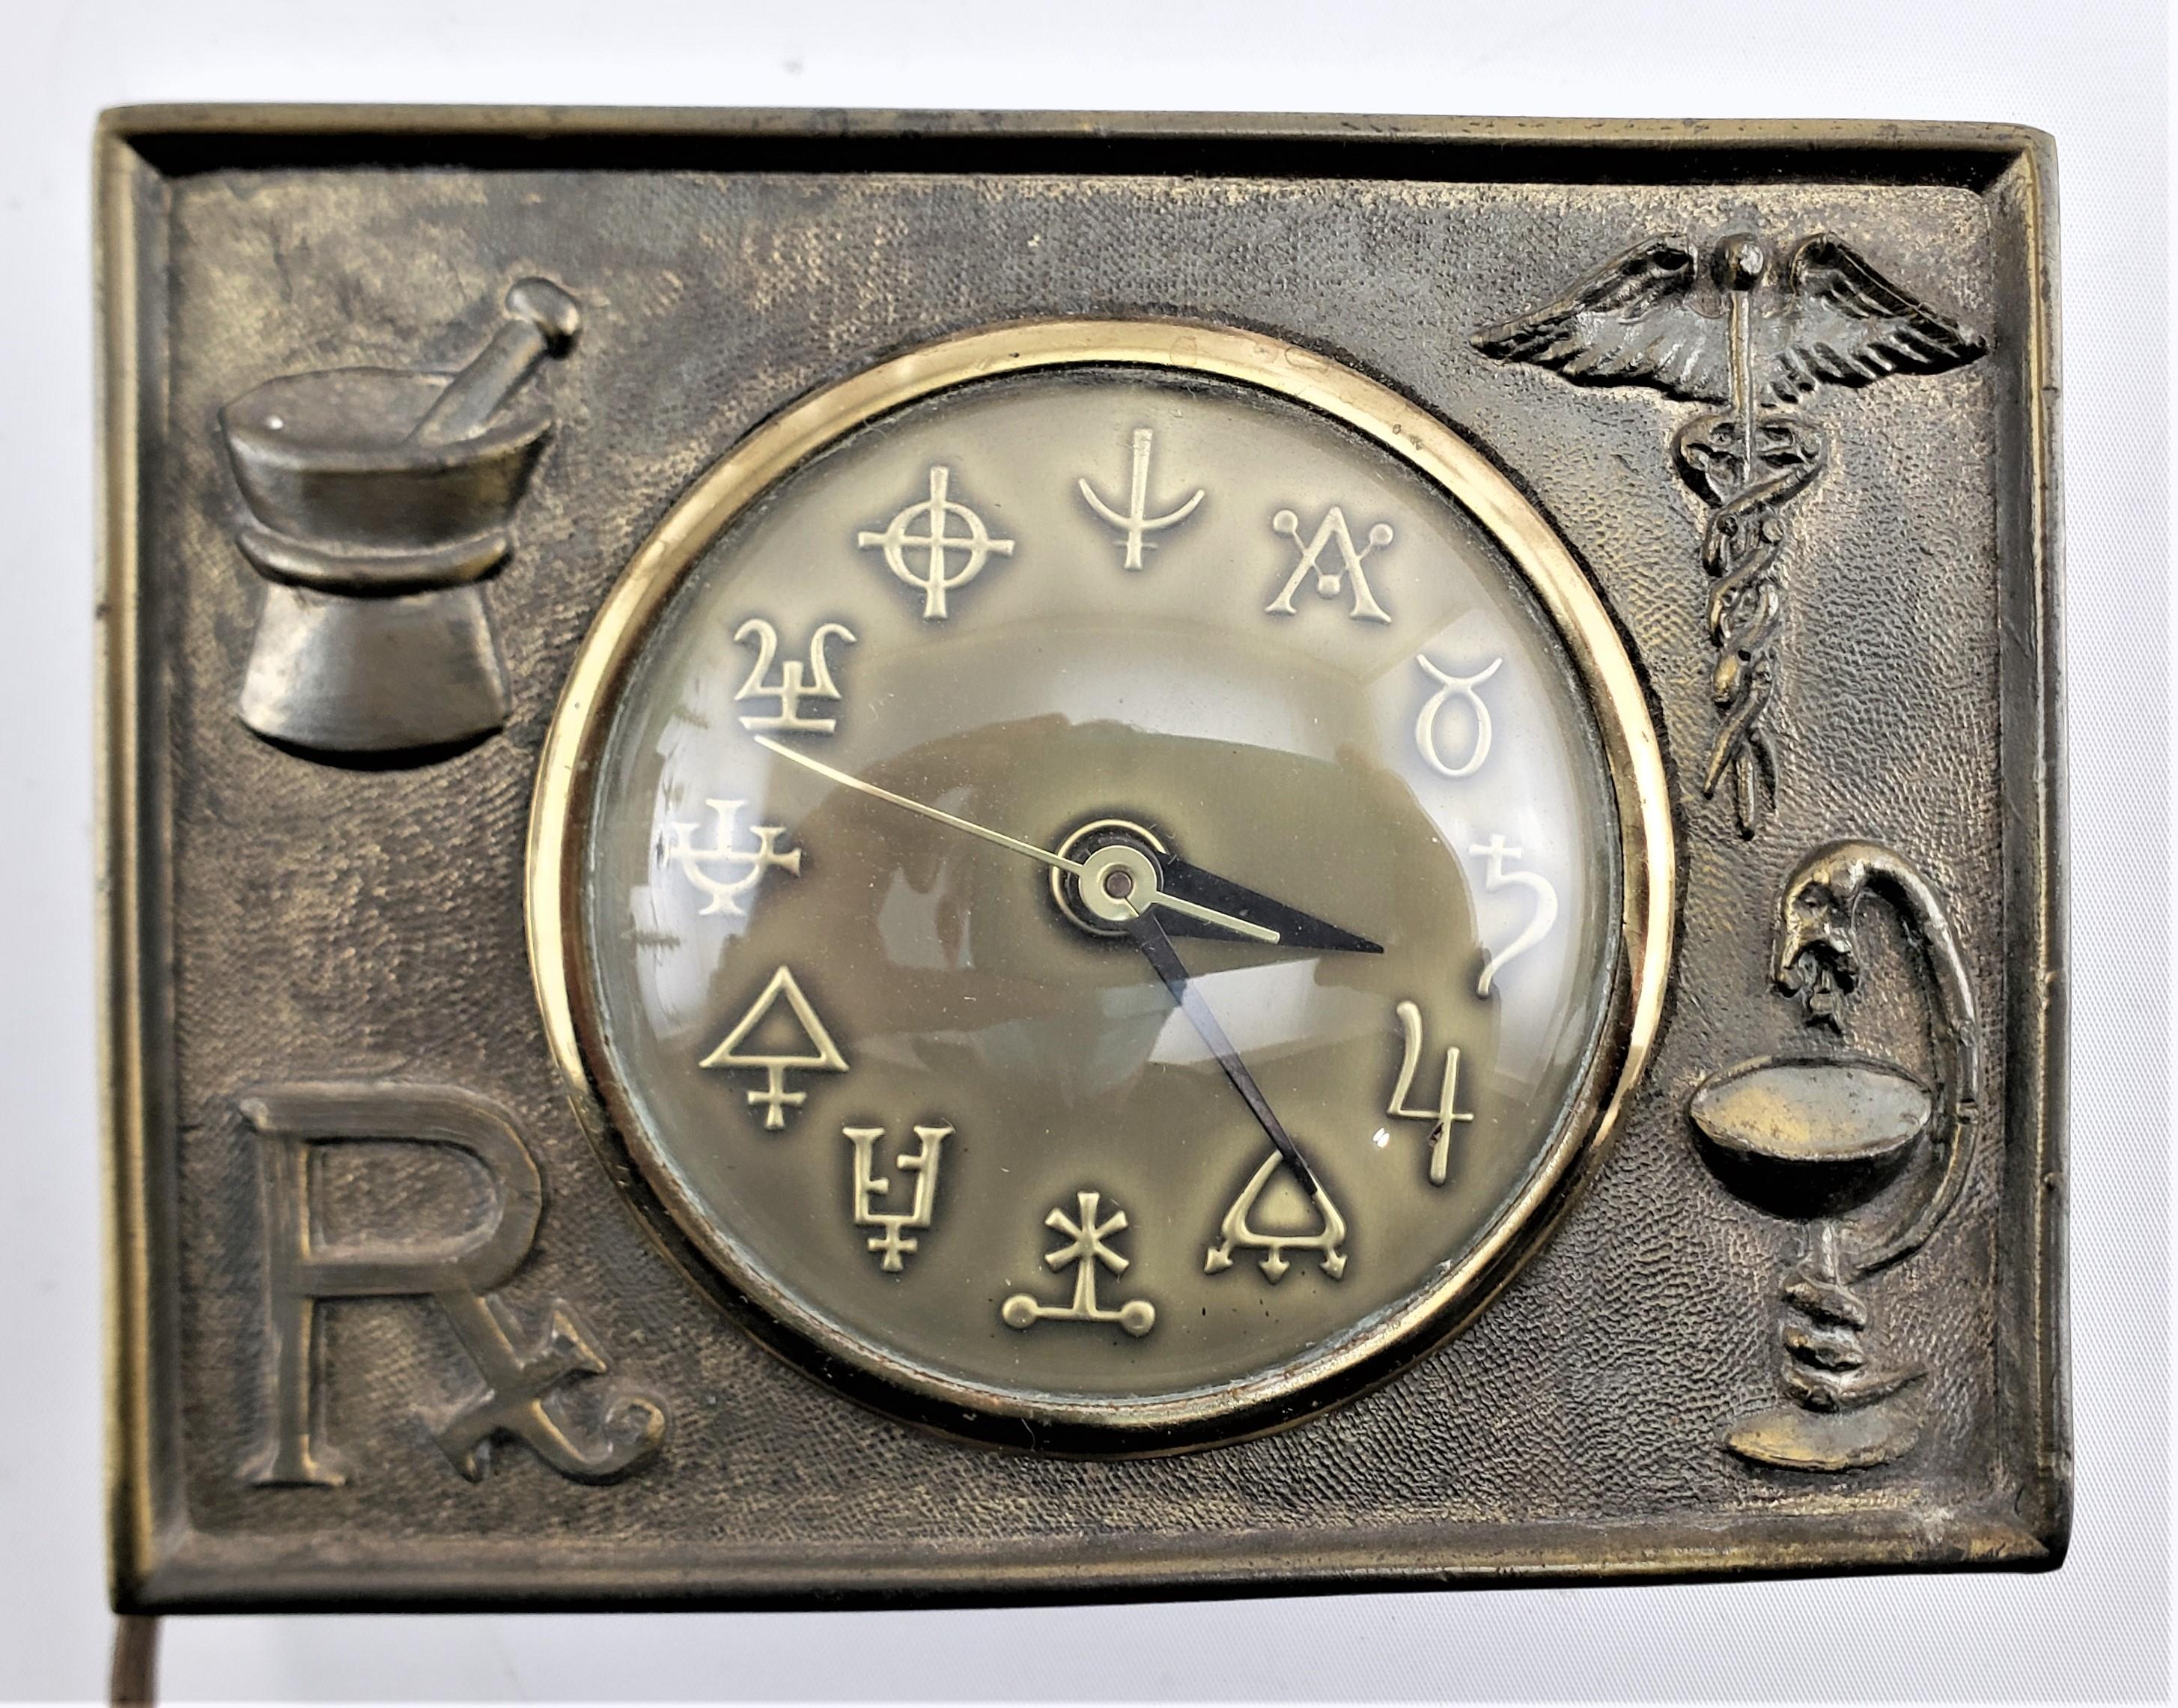 This antique desk or table clock has no maker's marks, but is presumed to have been made in the United States in approximately 1920 in the period Art Deco style. The cock face is done in a patinated cast brass and has iconic pharmaceutical or